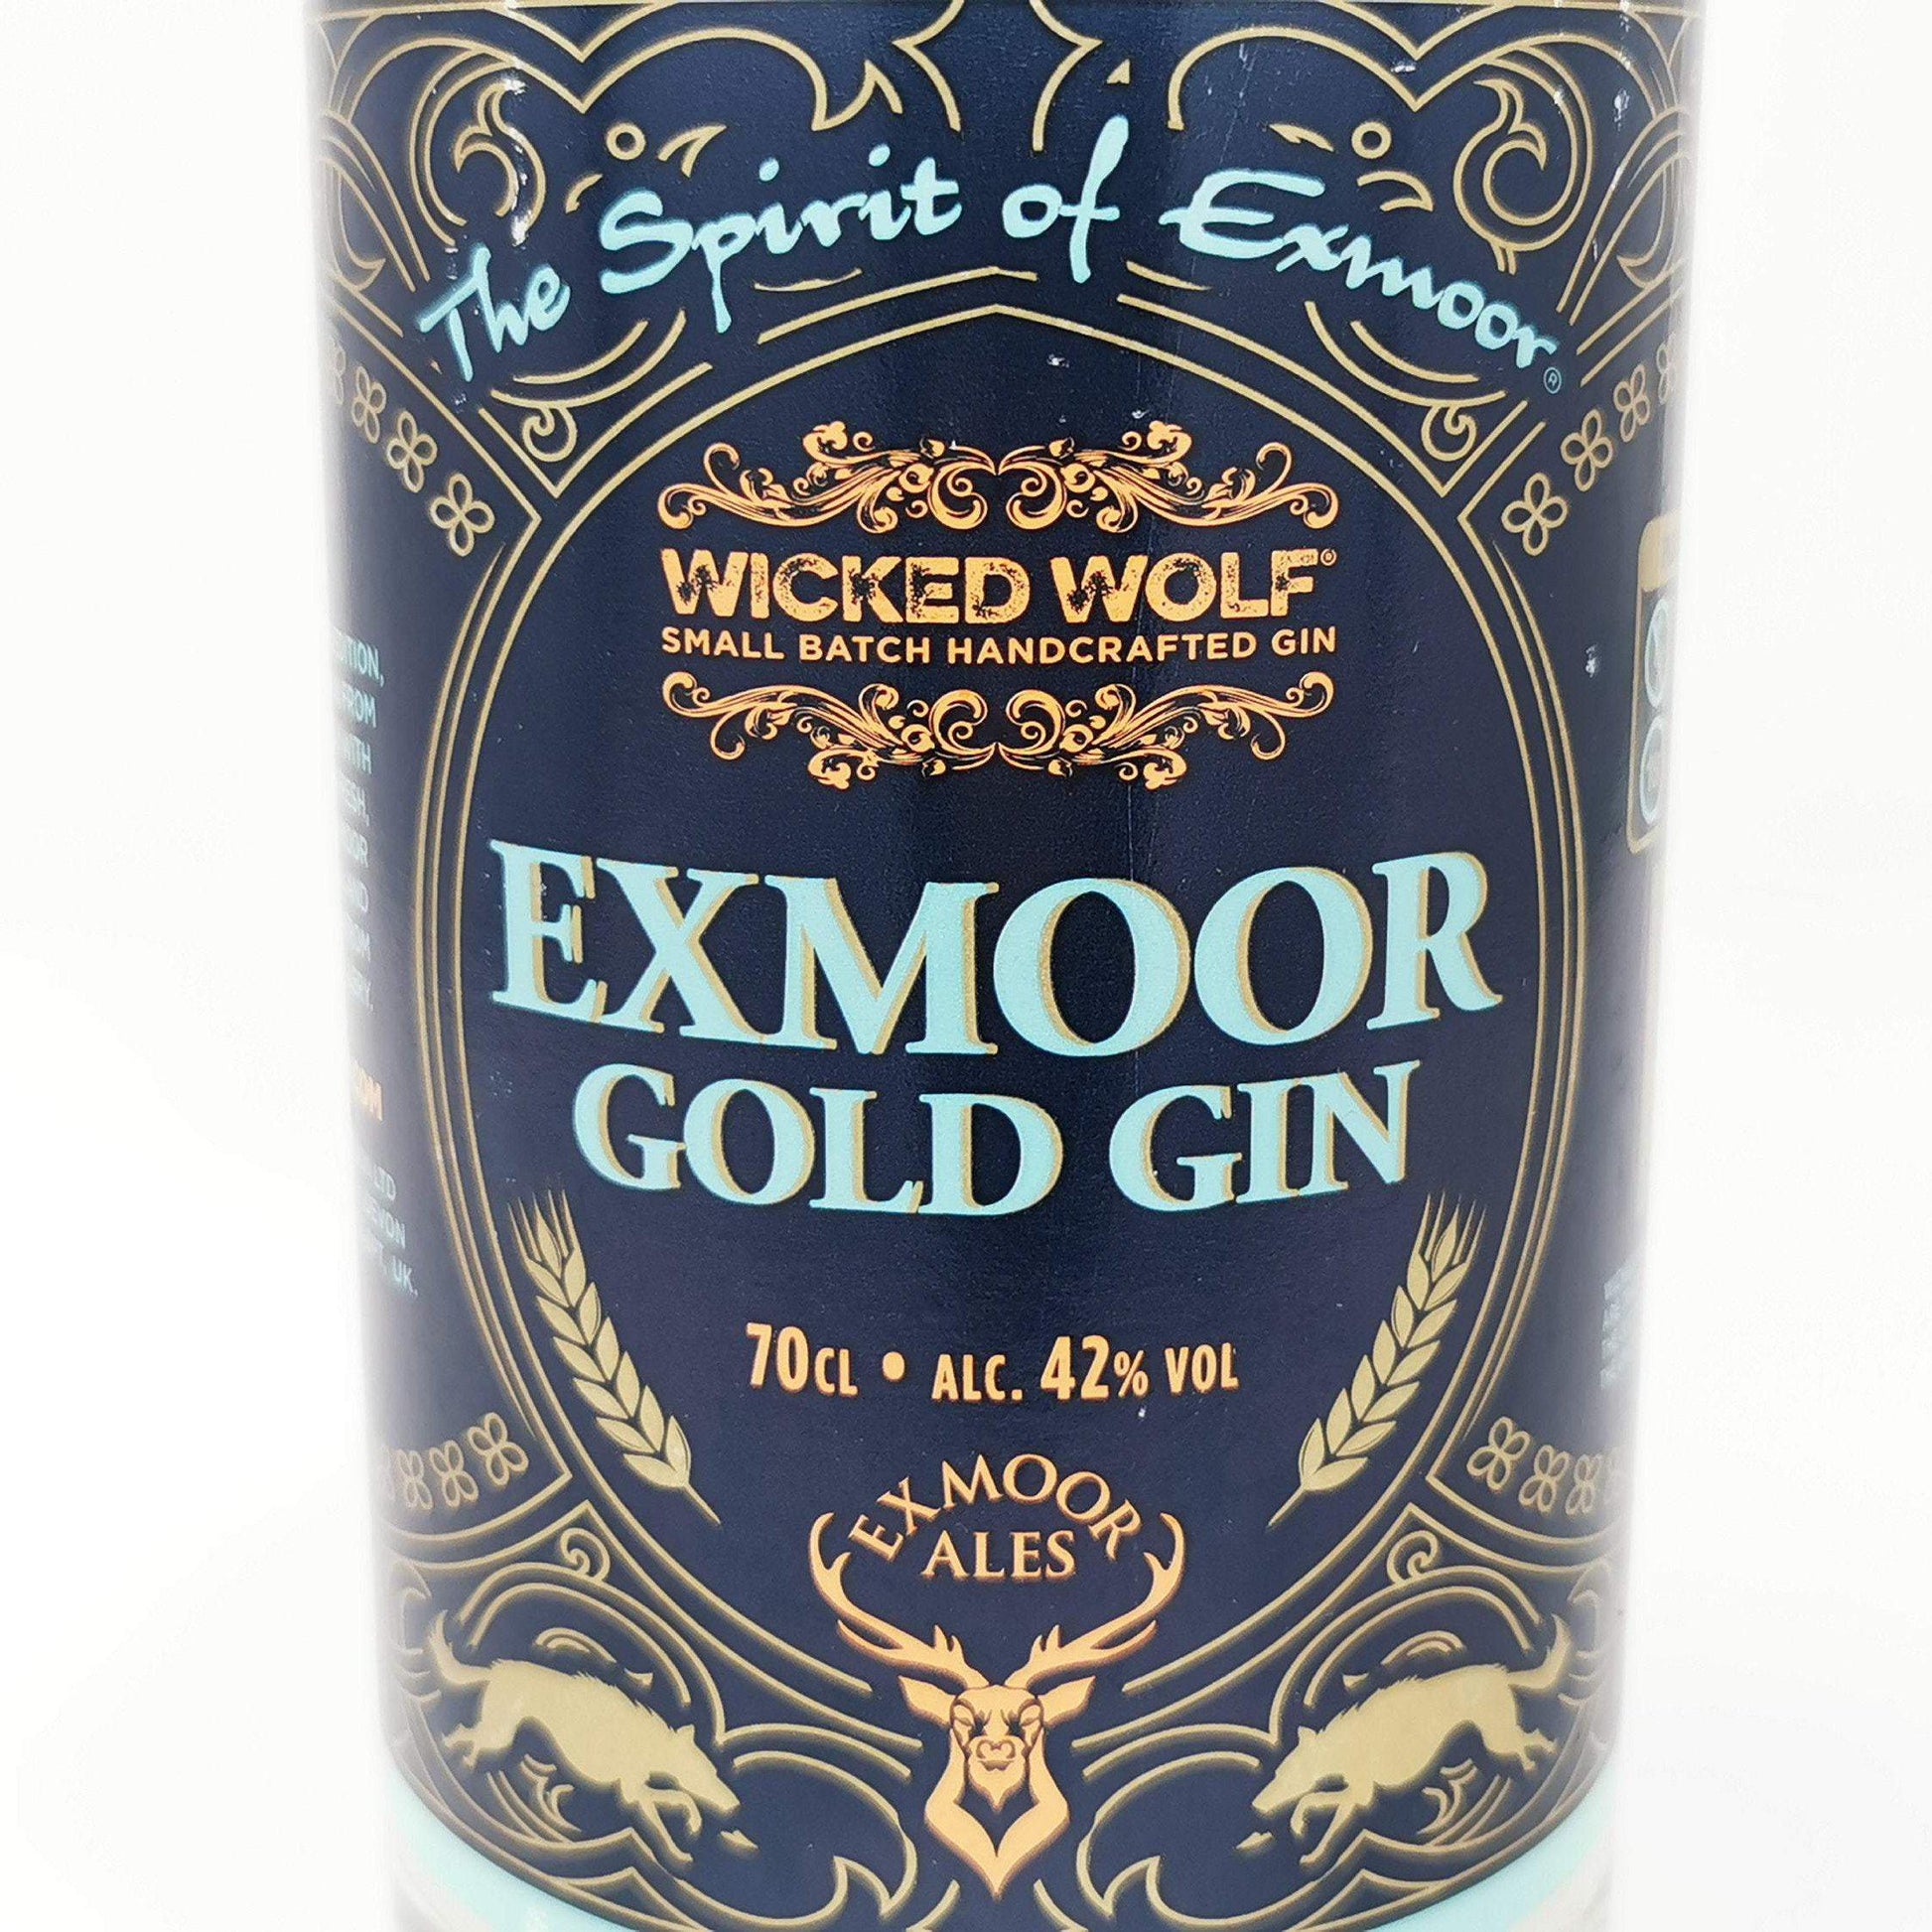 Wicked Wolf Exmoor Gold Gin Bottle Candle-Gin Bottle Candles-Adhock Homeware